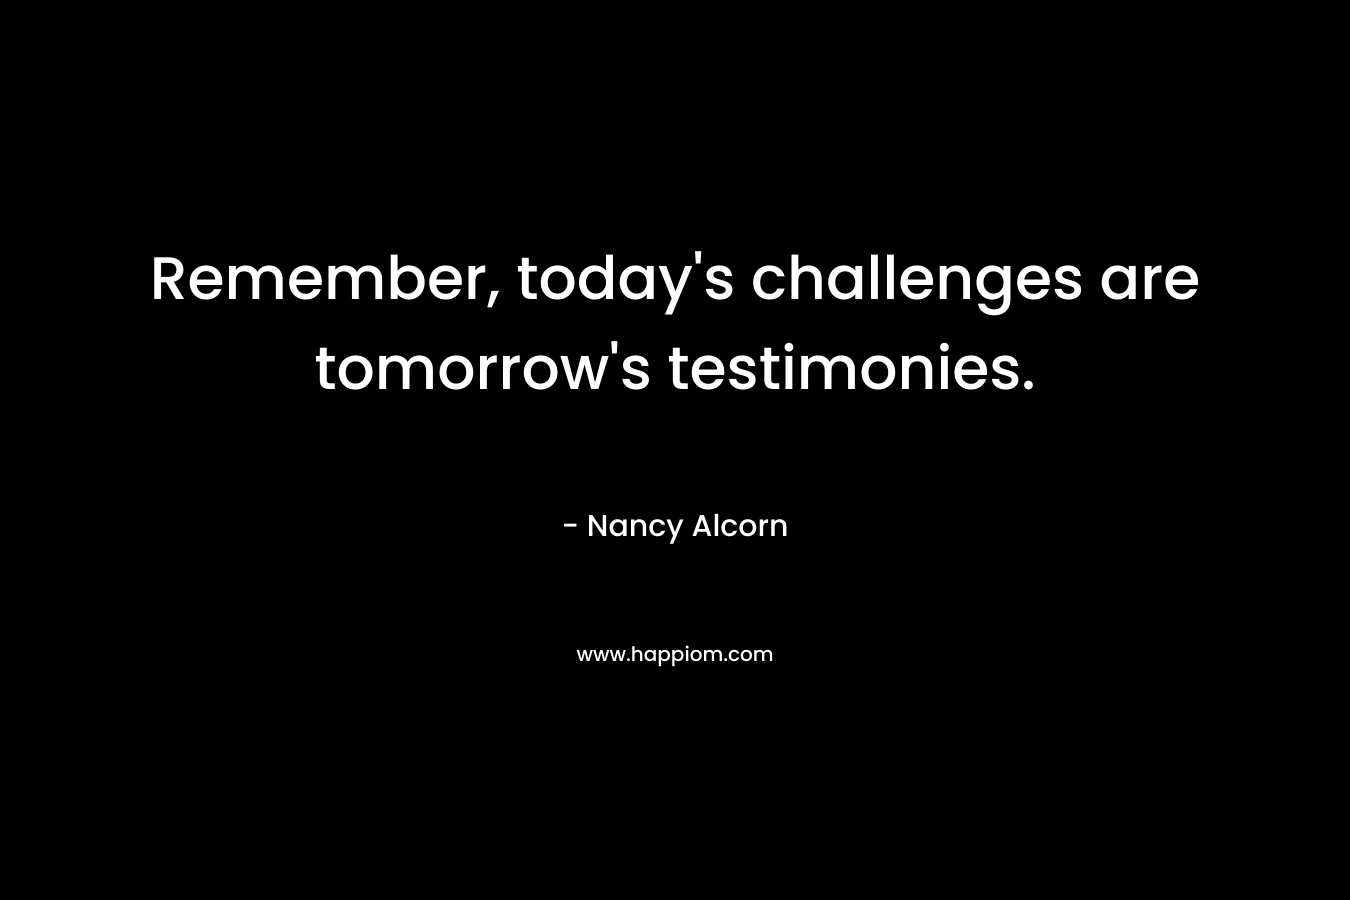 Remember, today’s challenges are tomorrow’s testimonies. – Nancy Alcorn